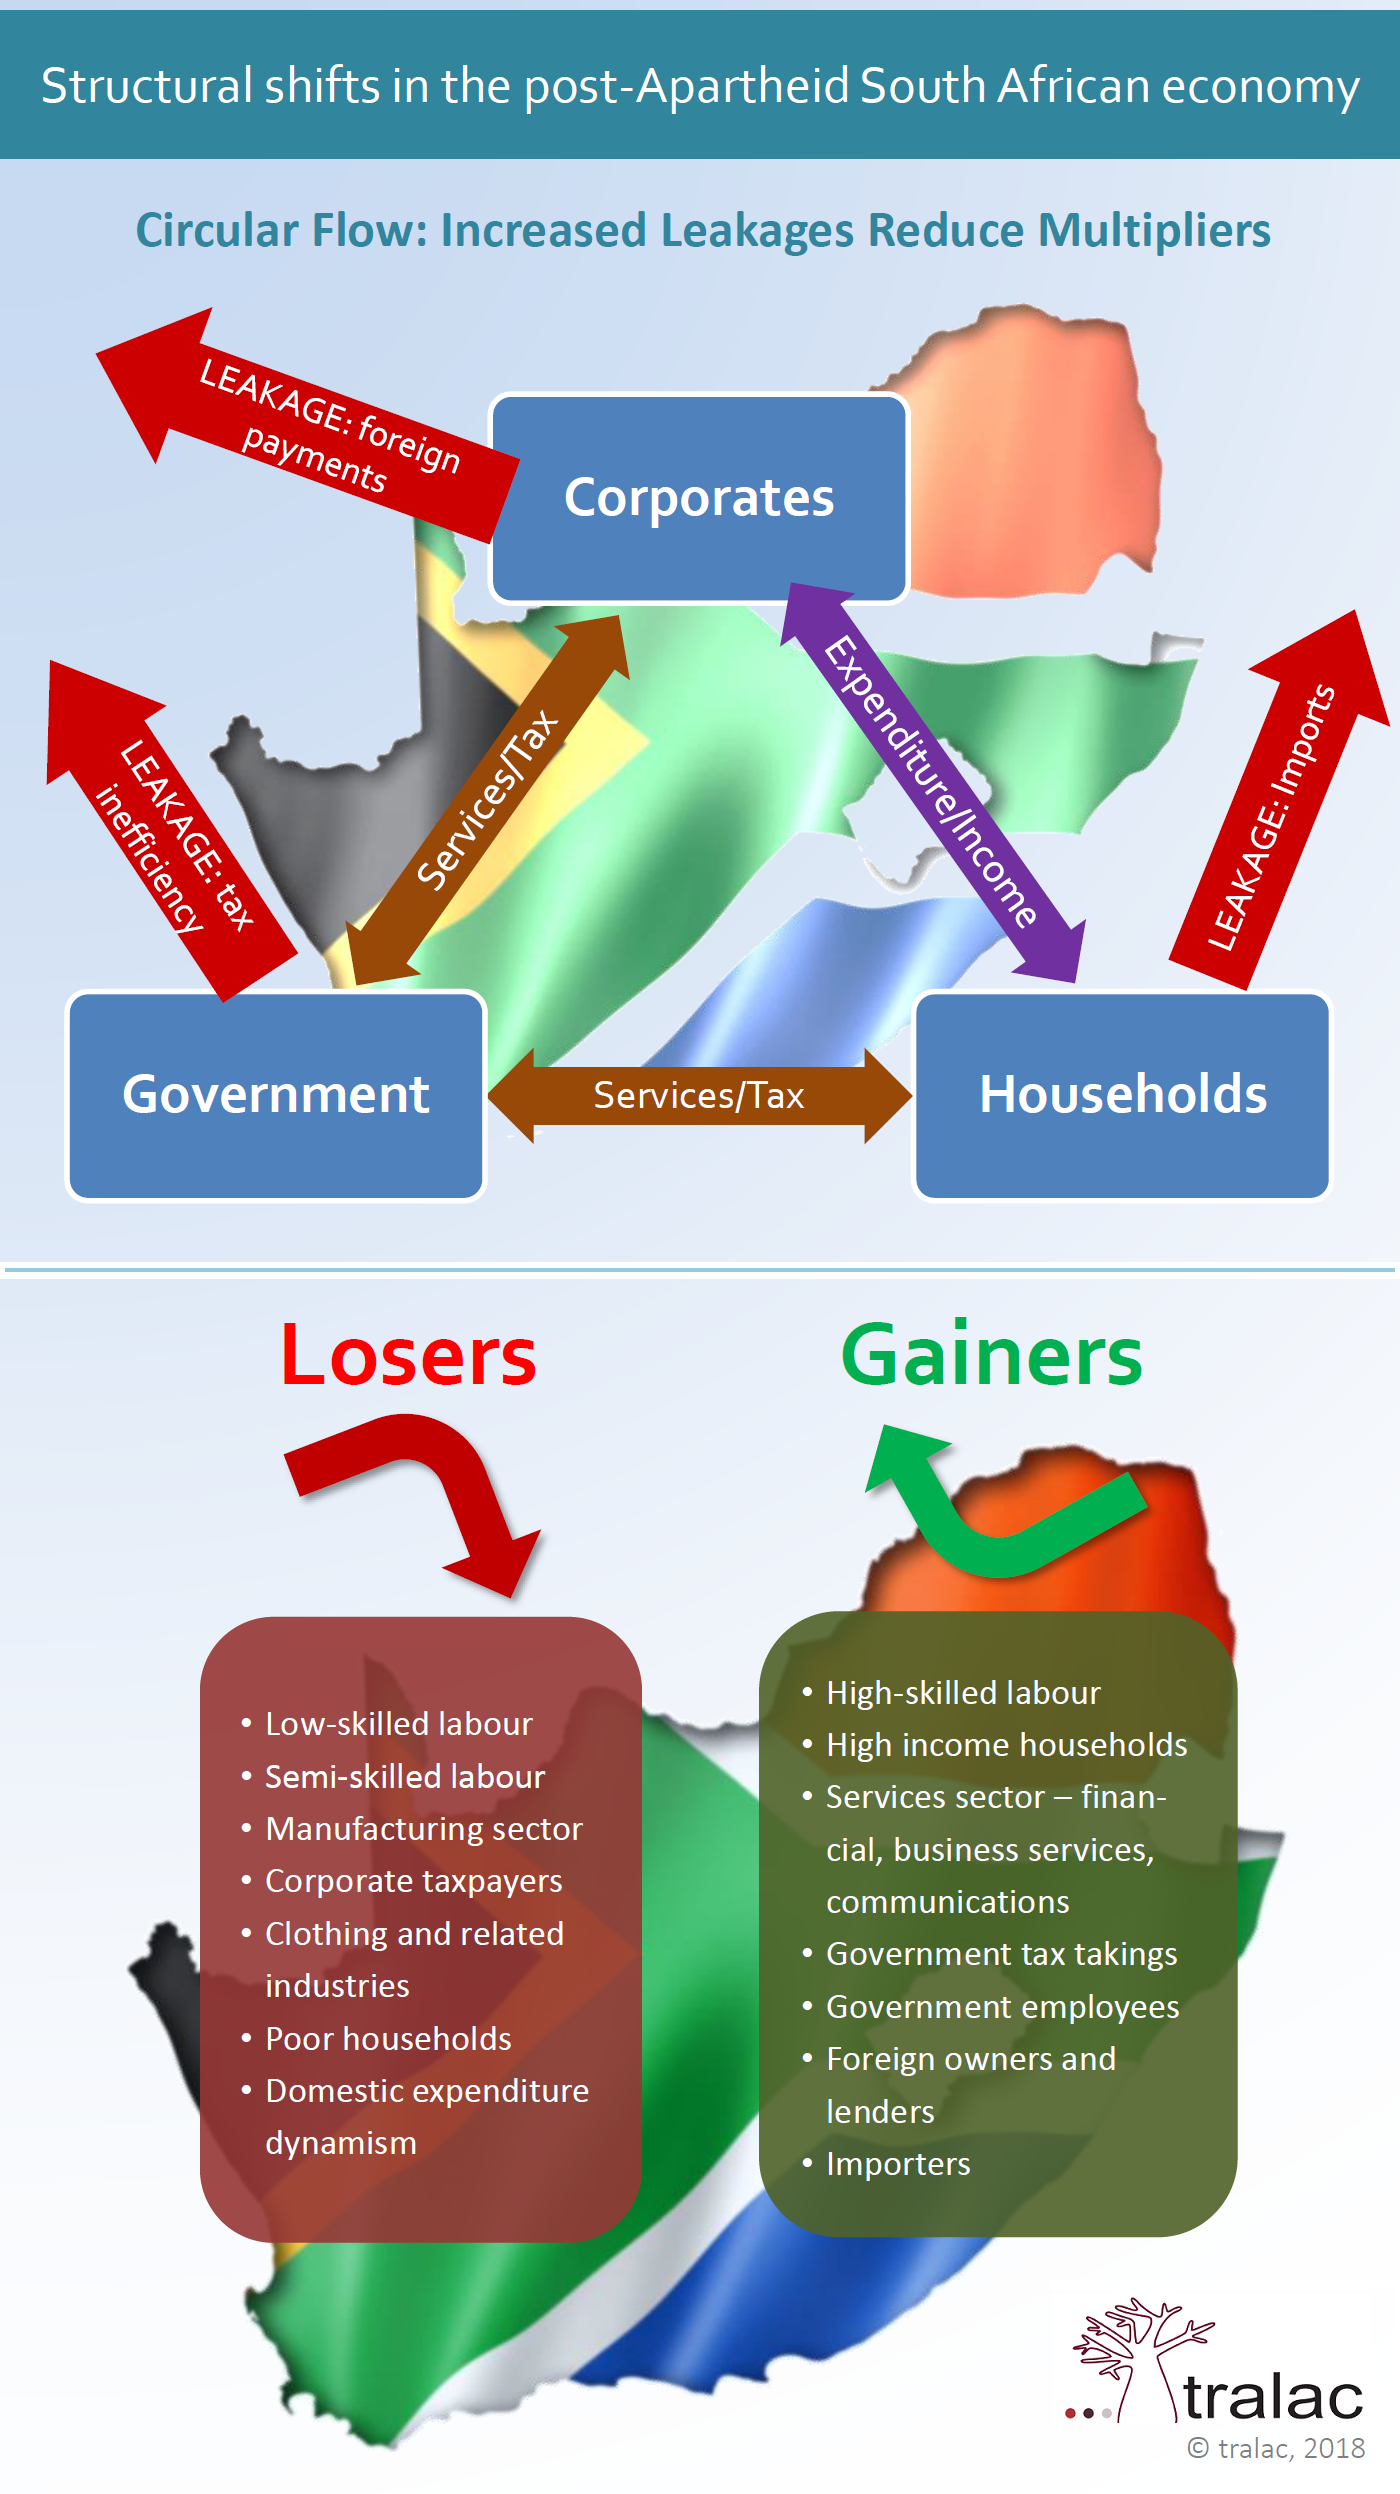 Structural shifts in the post-Apartheid SA economy